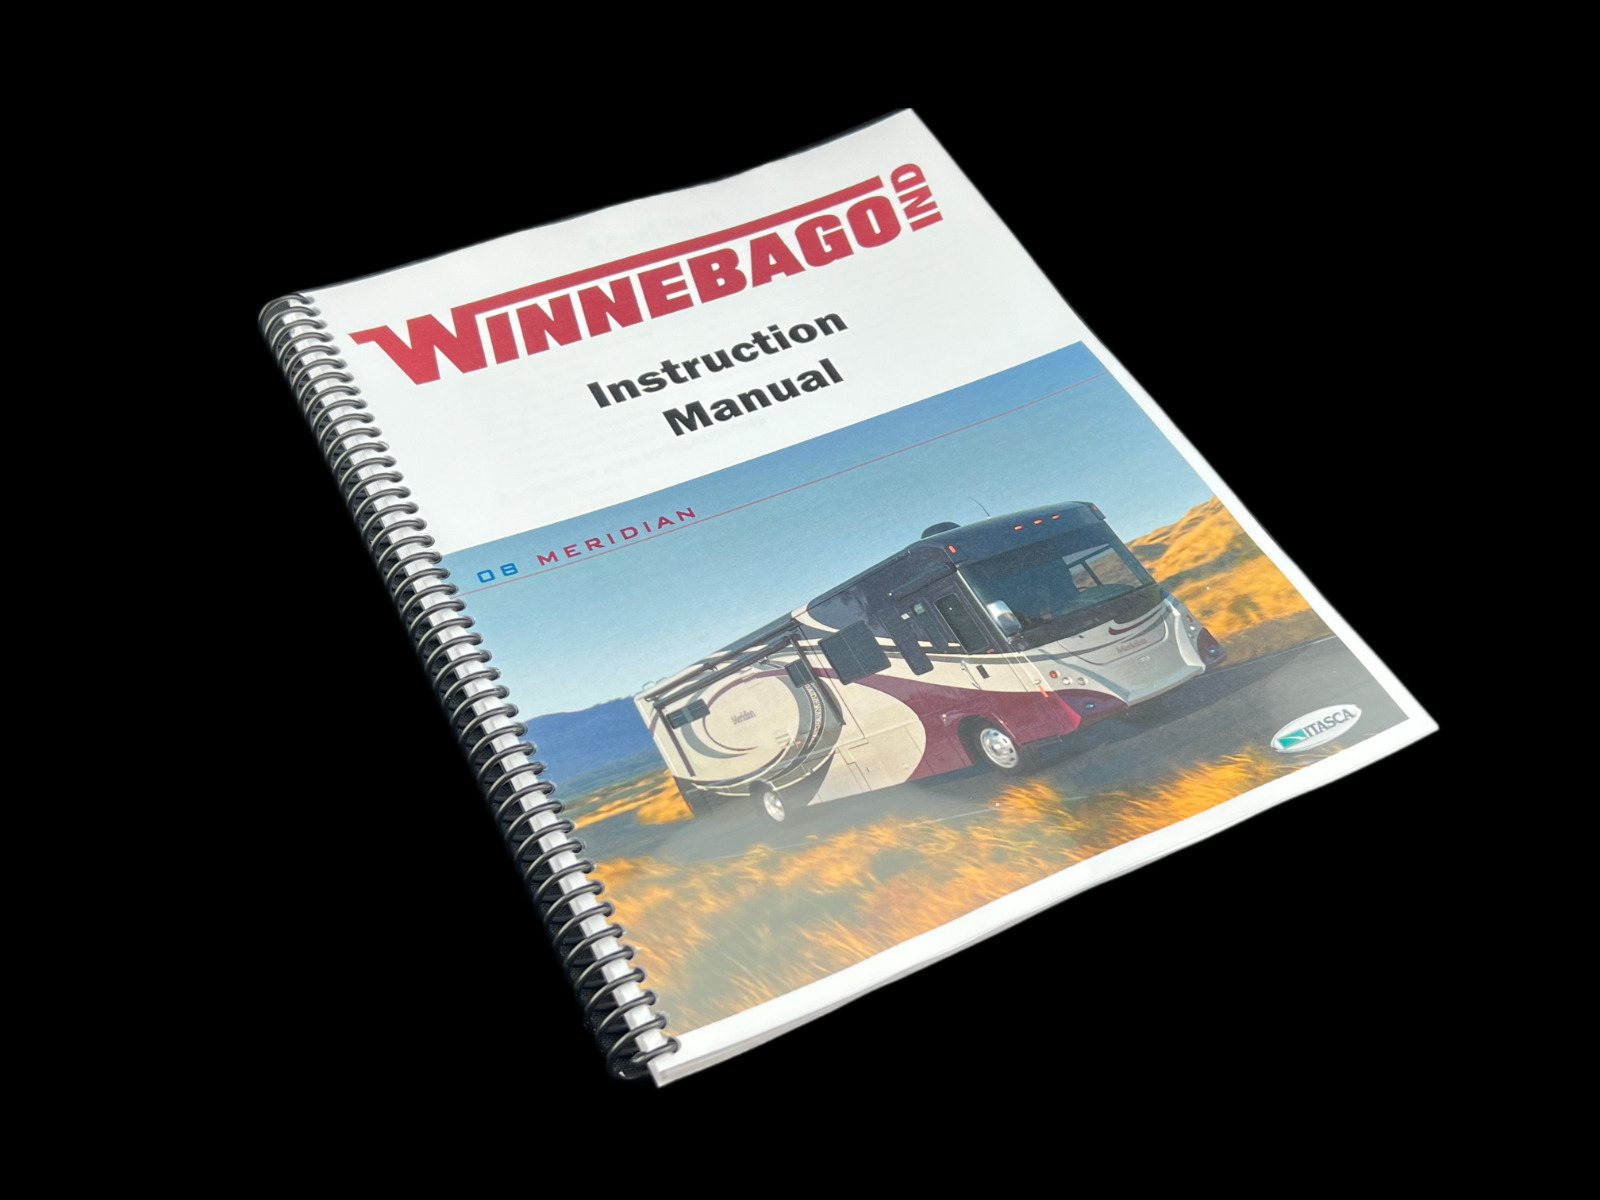 2008 Winnebago Meridian Home Owners Operation Manual User Guide Coil Bound